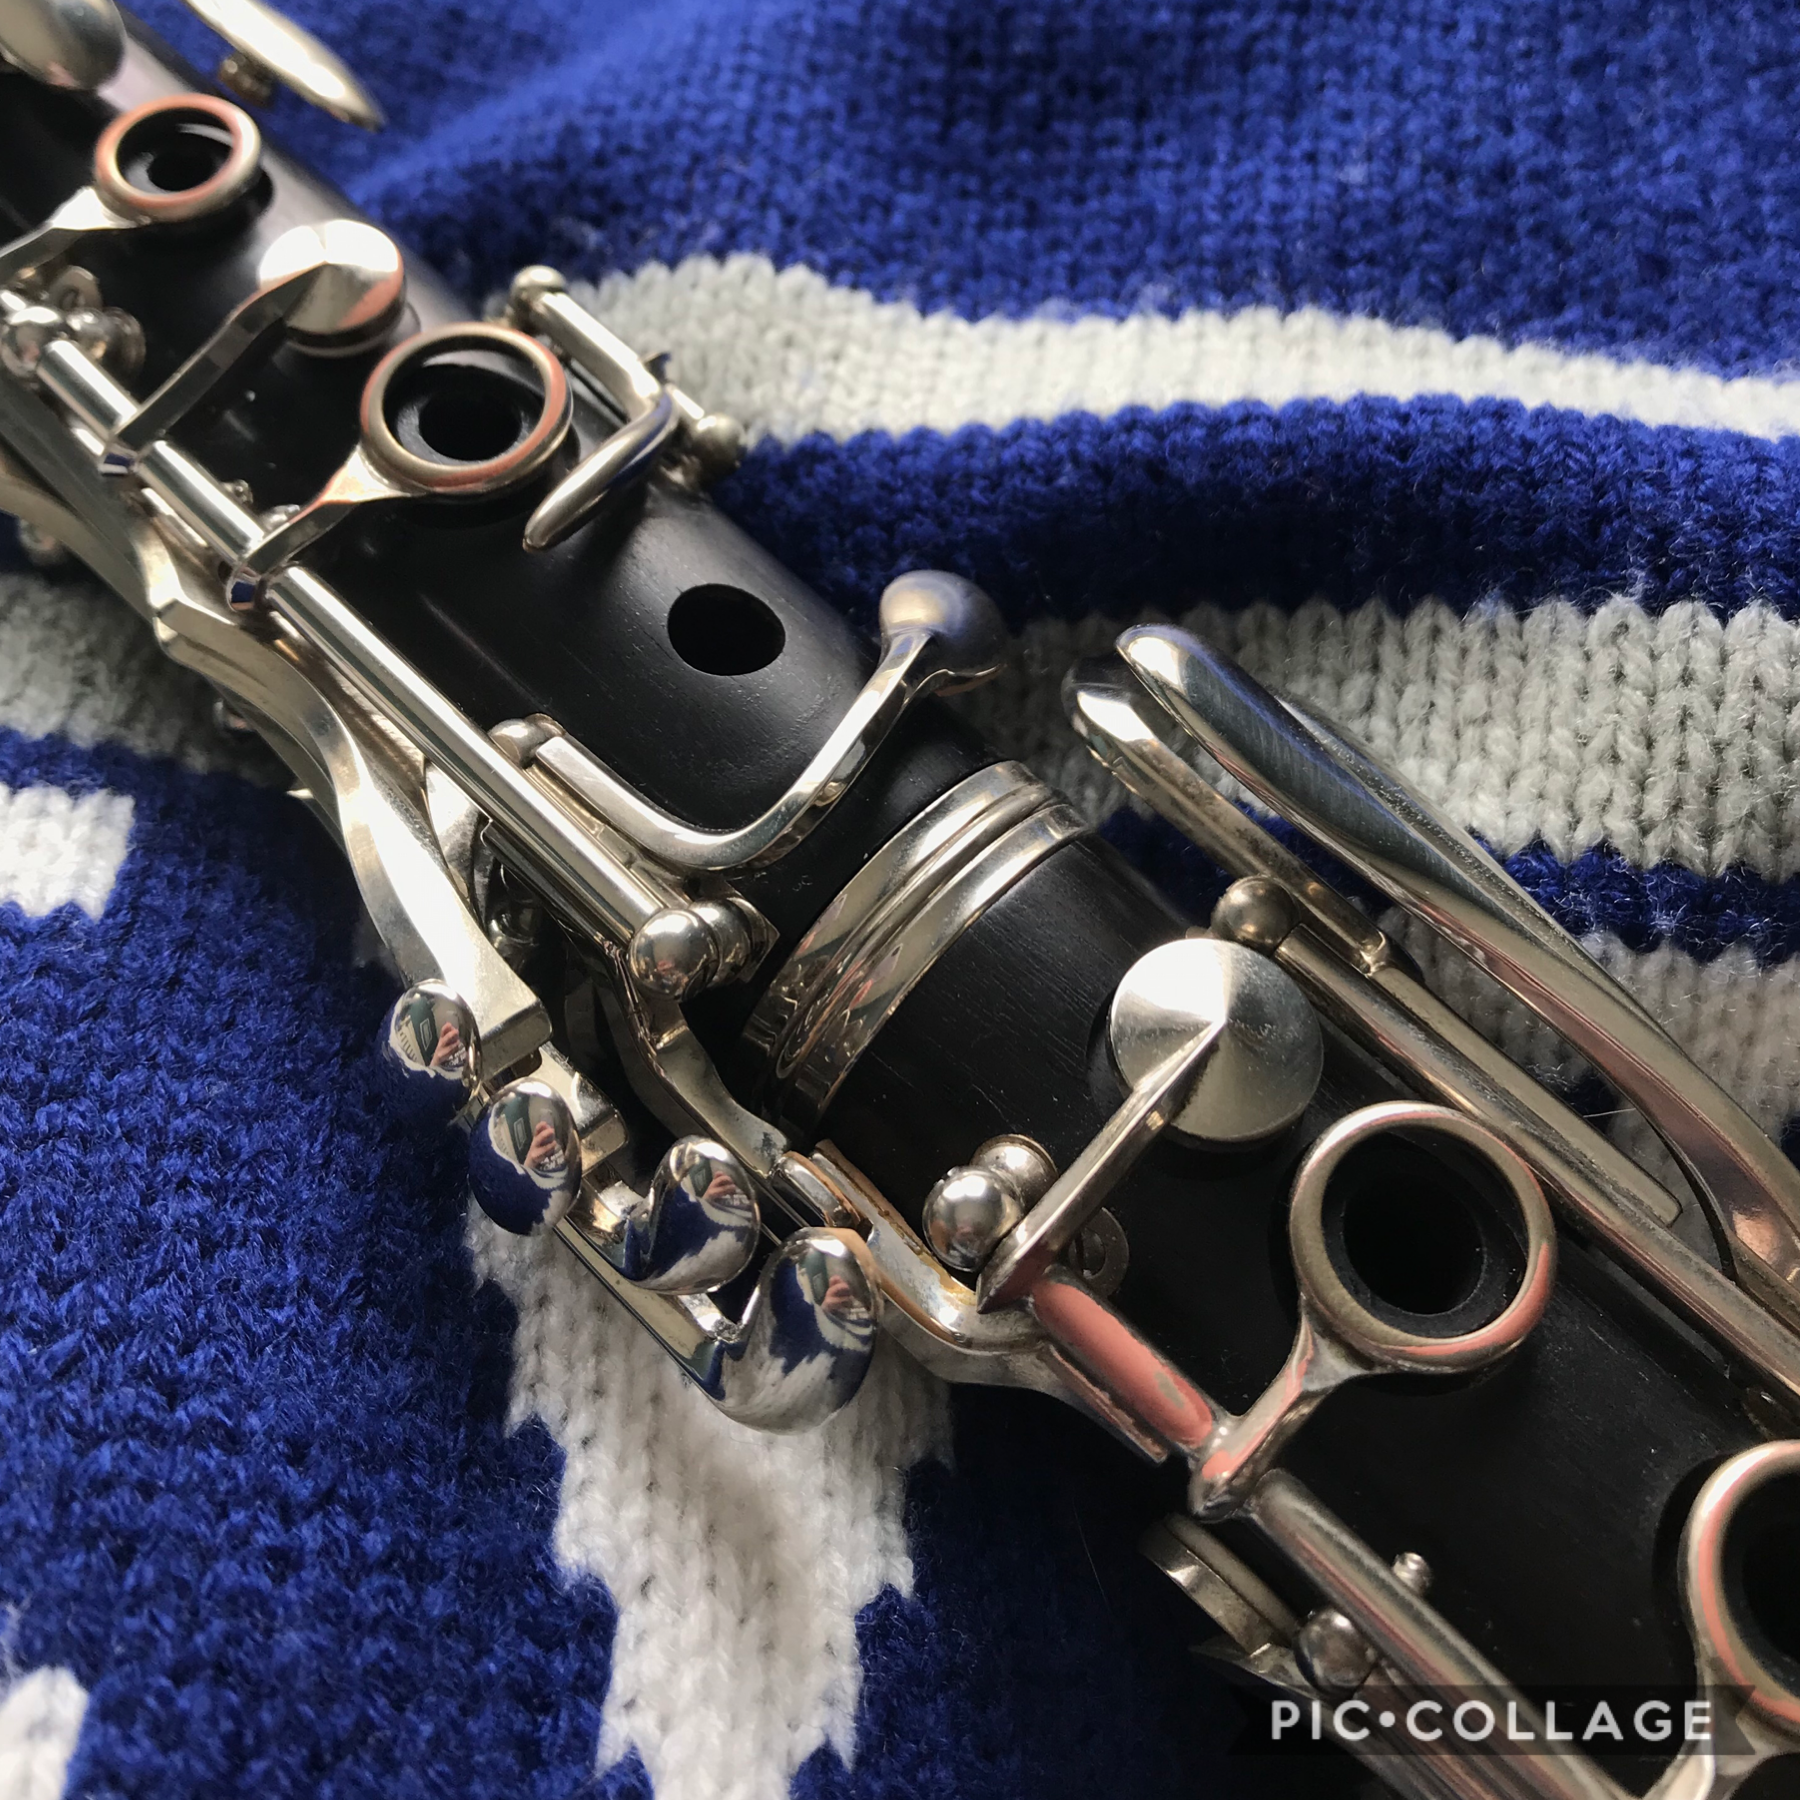 my child (tap)

Aight I swear I’m actually getting stuff done, I’m in the middle of redesigning my botw ocs so be ready for that. In the meantime, have a picture of my clarinet lmaø